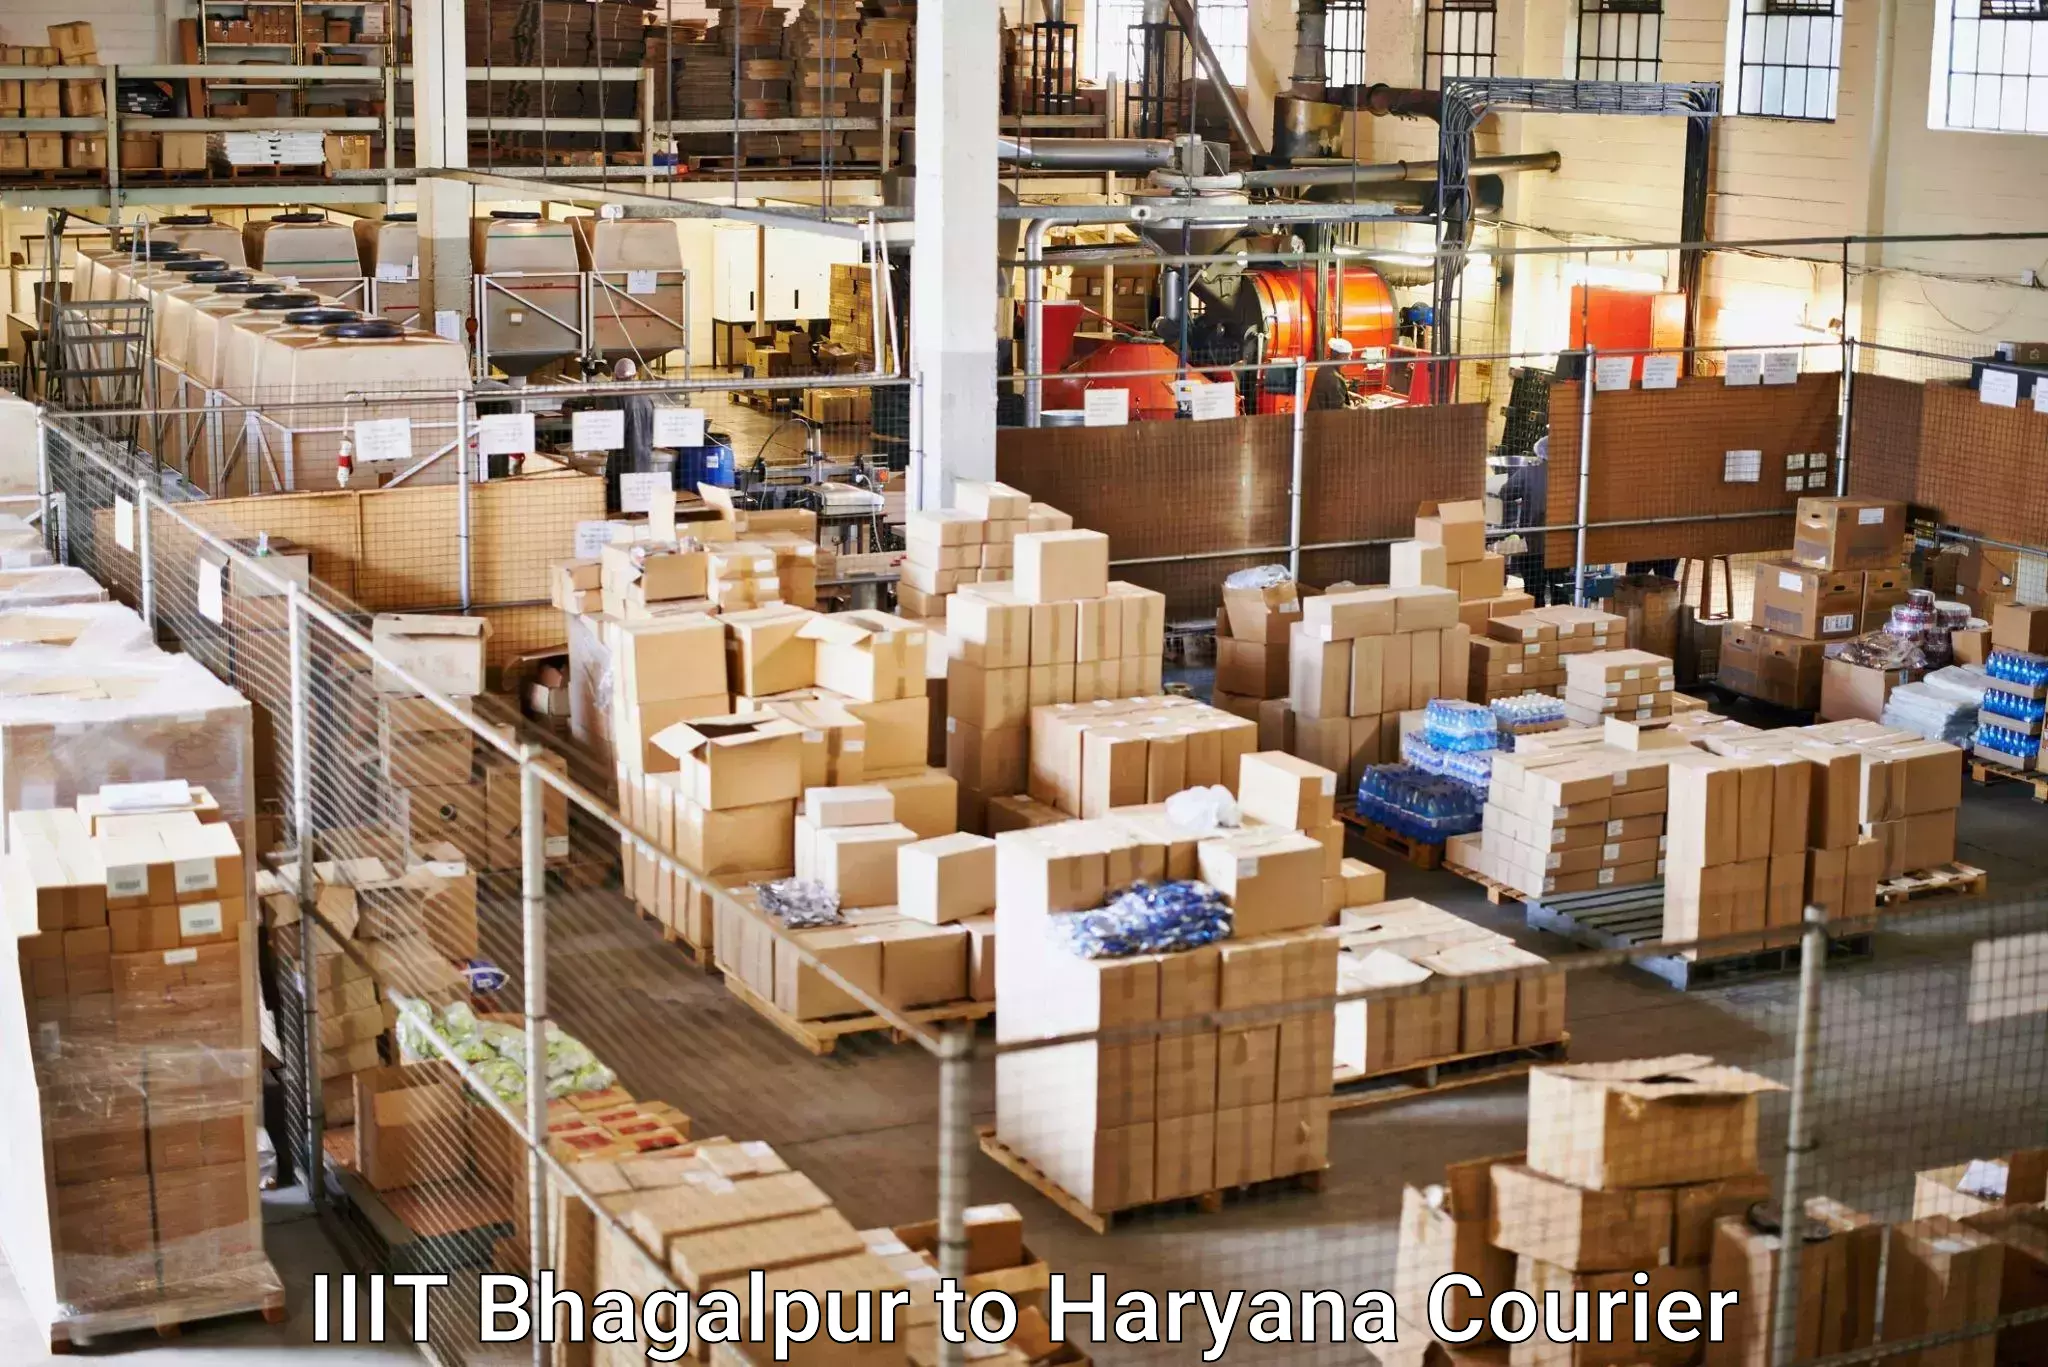 Large-scale shipping solutions IIIT Bhagalpur to Haryana